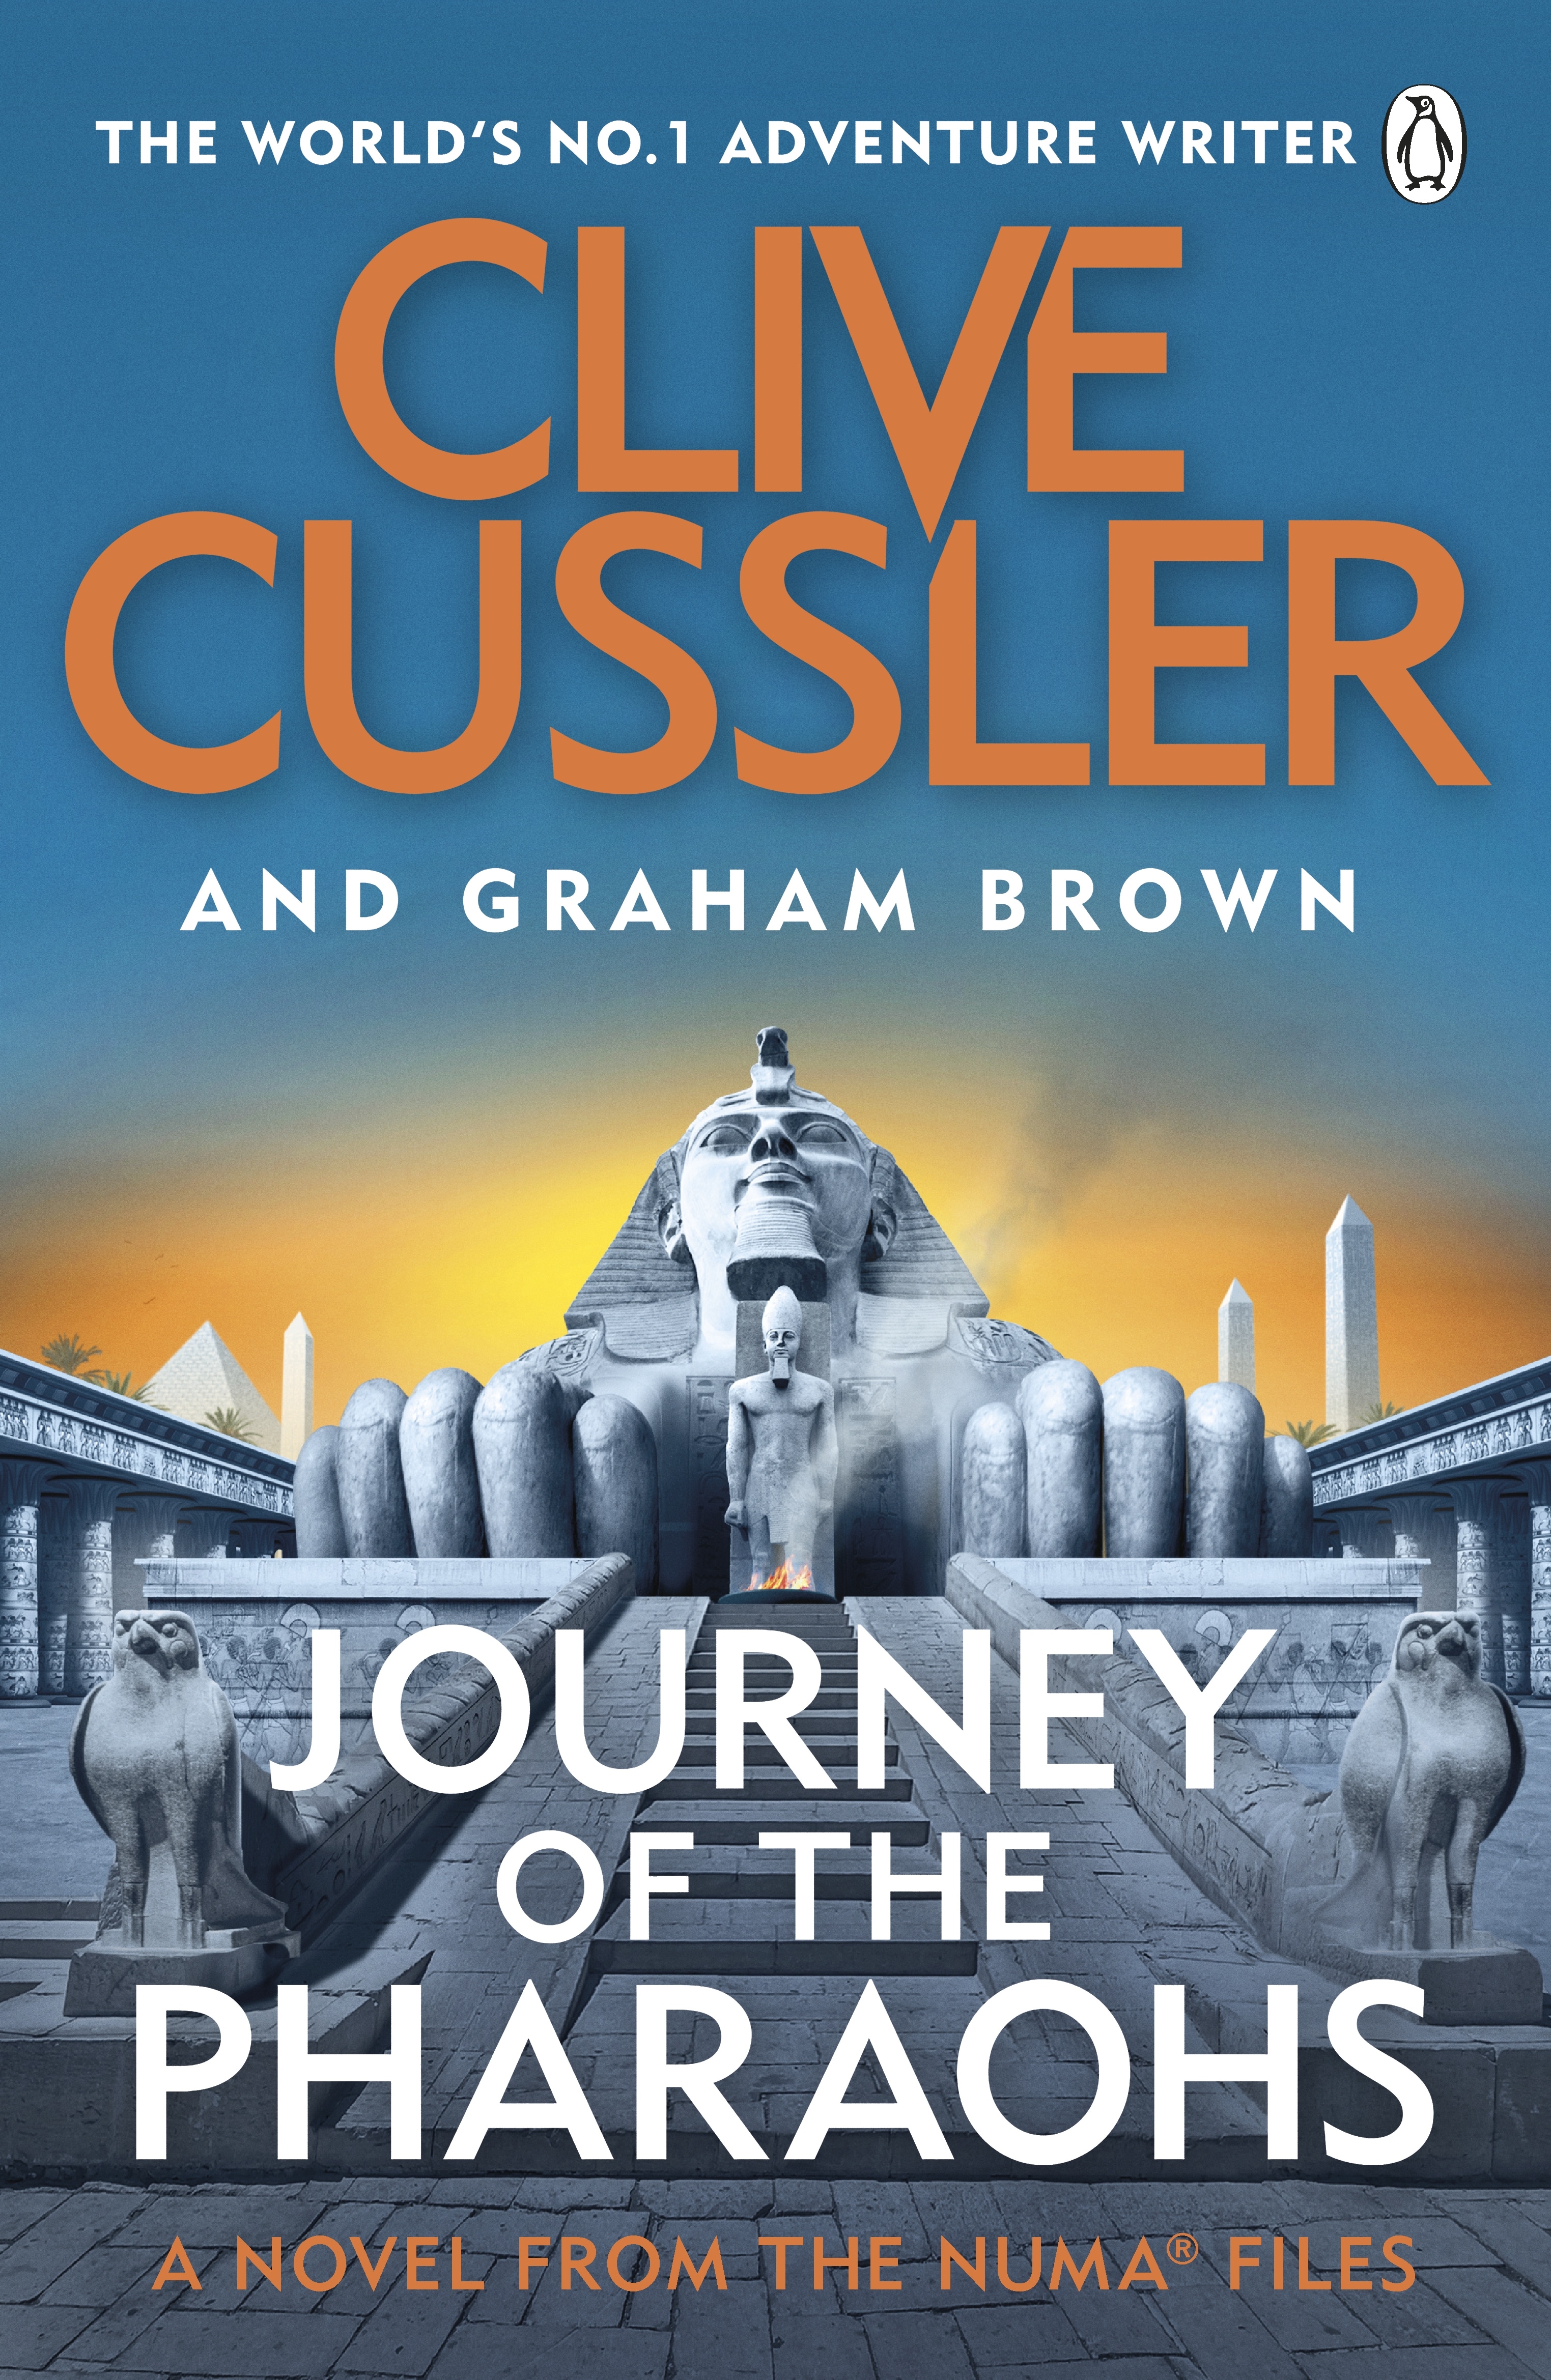 Book “Journey of the Pharaohs” by Clive Cussler, Graham Brown — August 19, 2021